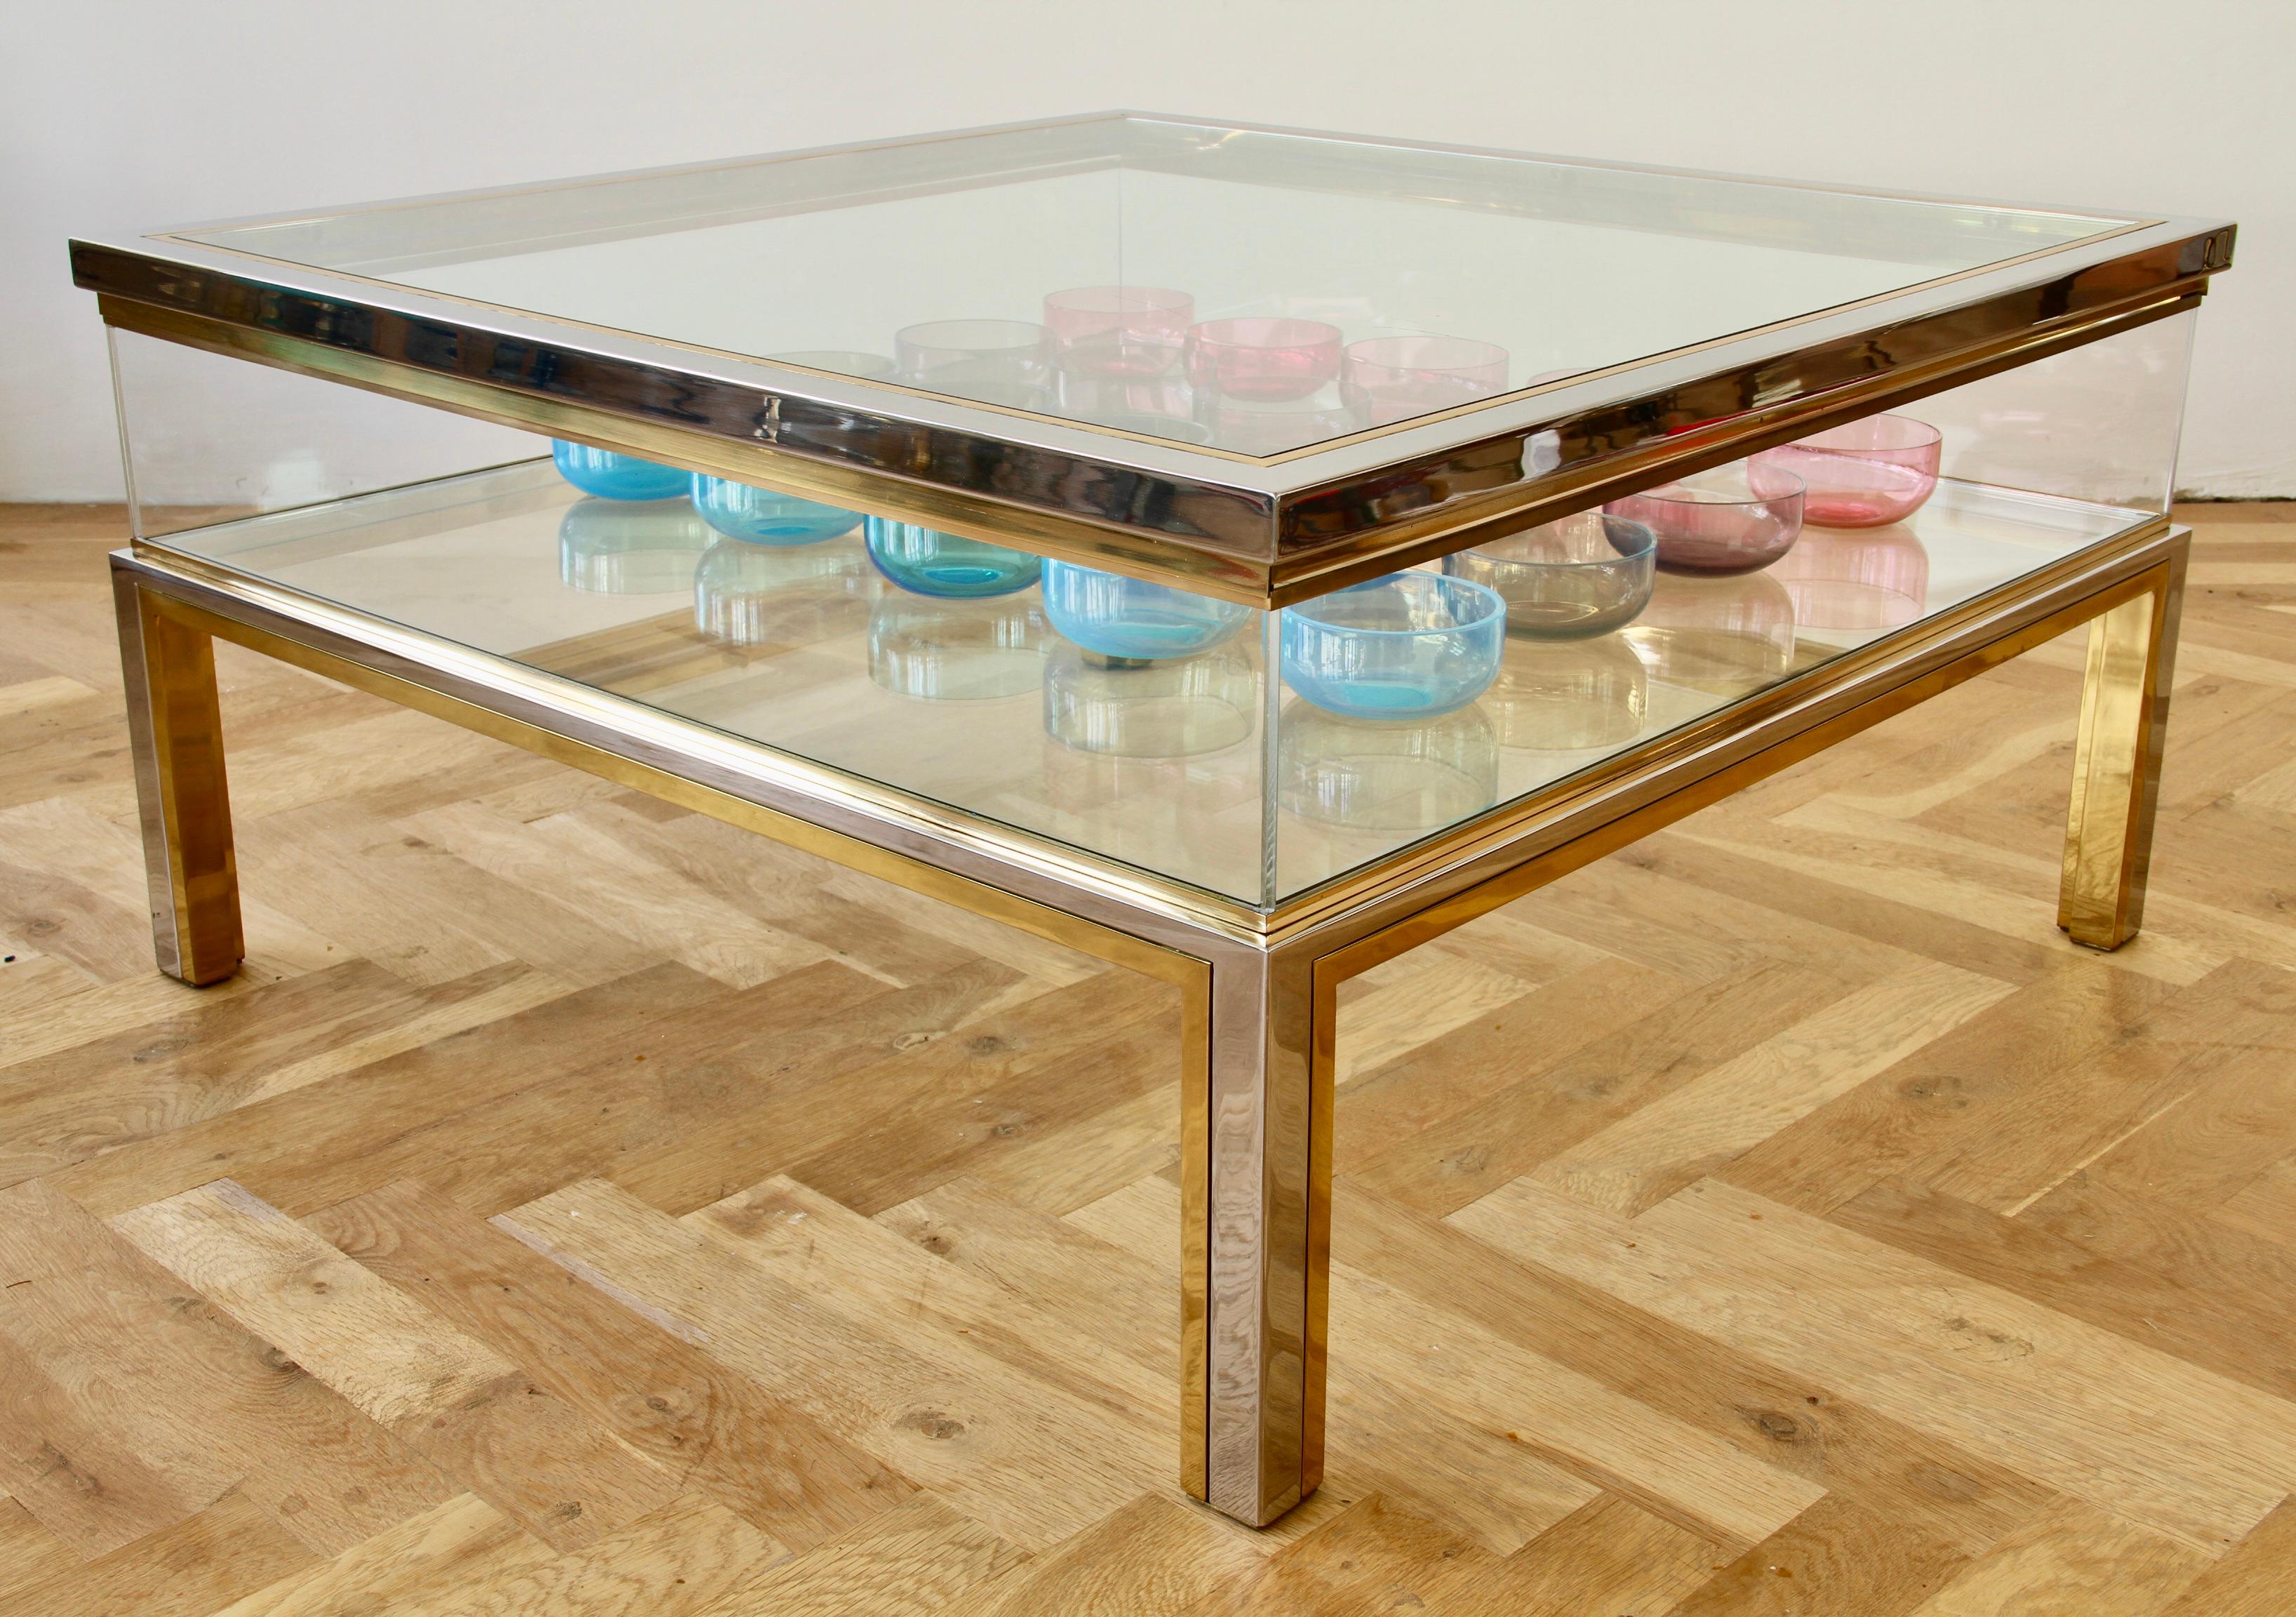 Maison Jansen Style Mid-Century Brass and Chrome Bicolor Vitrine Coffee Table For Sale 1